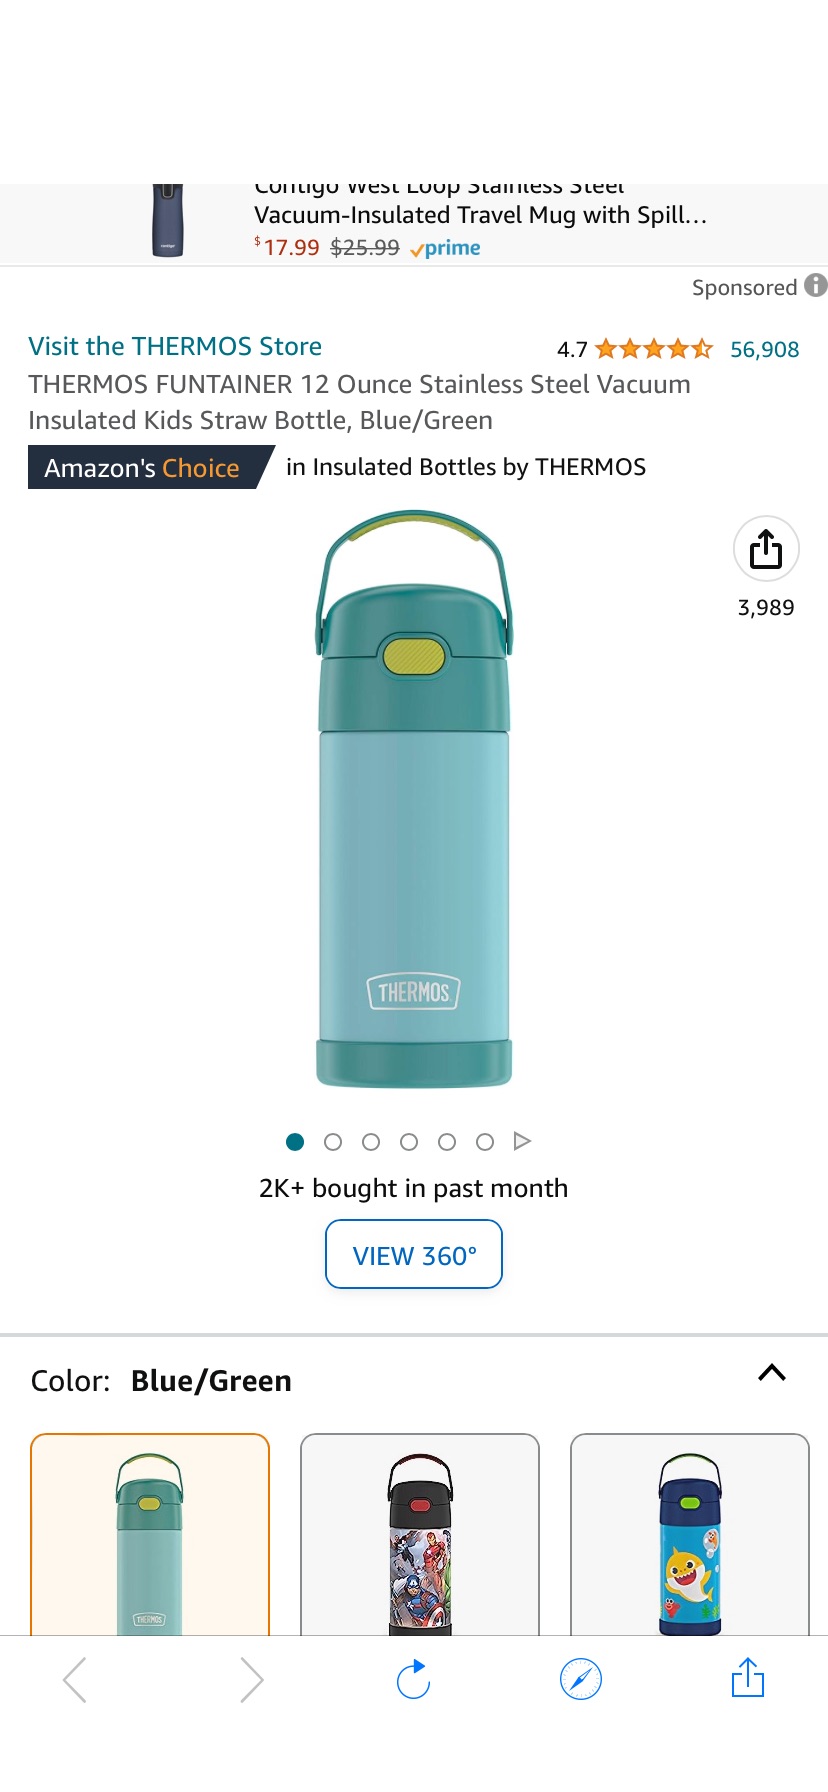 Amazon.com: THERMOS 儿童水杯FUNTAINER 12 Ounce Stainless Steel Vacuum Insulated Kids Straw Bottle, Blue/Green: Home & Kitchen